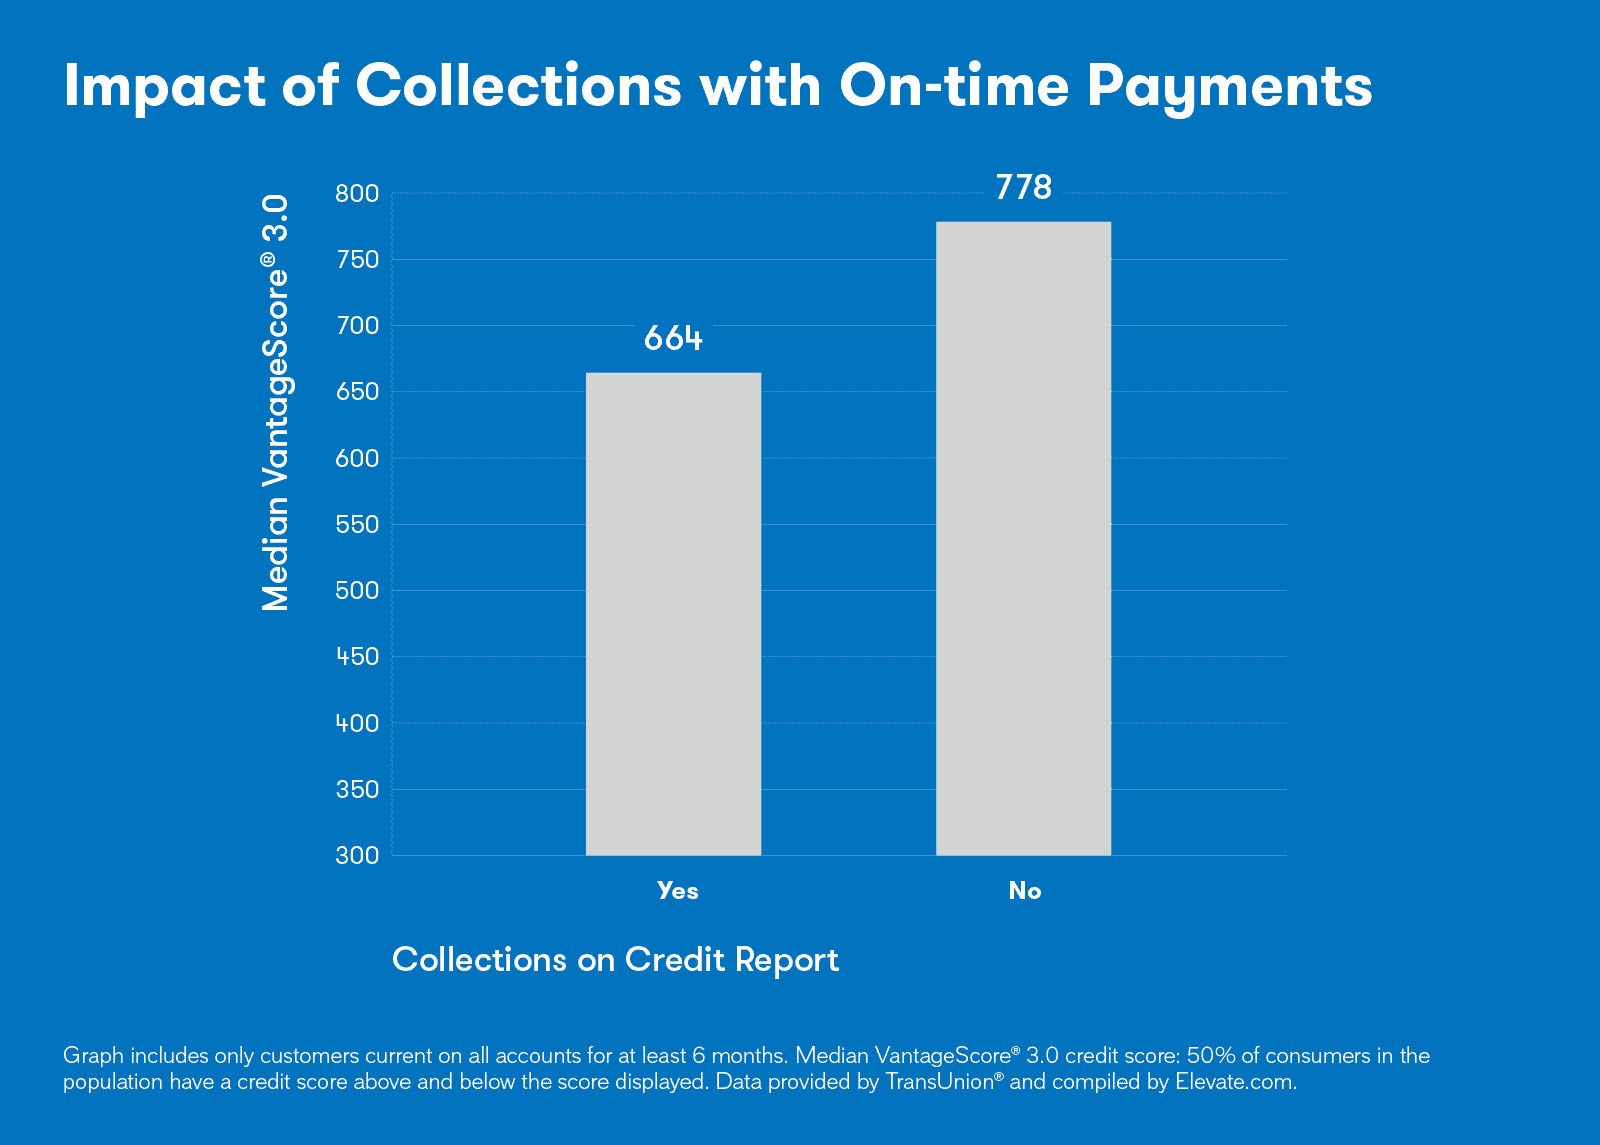 This graph shows the impact of collections with on-time payments